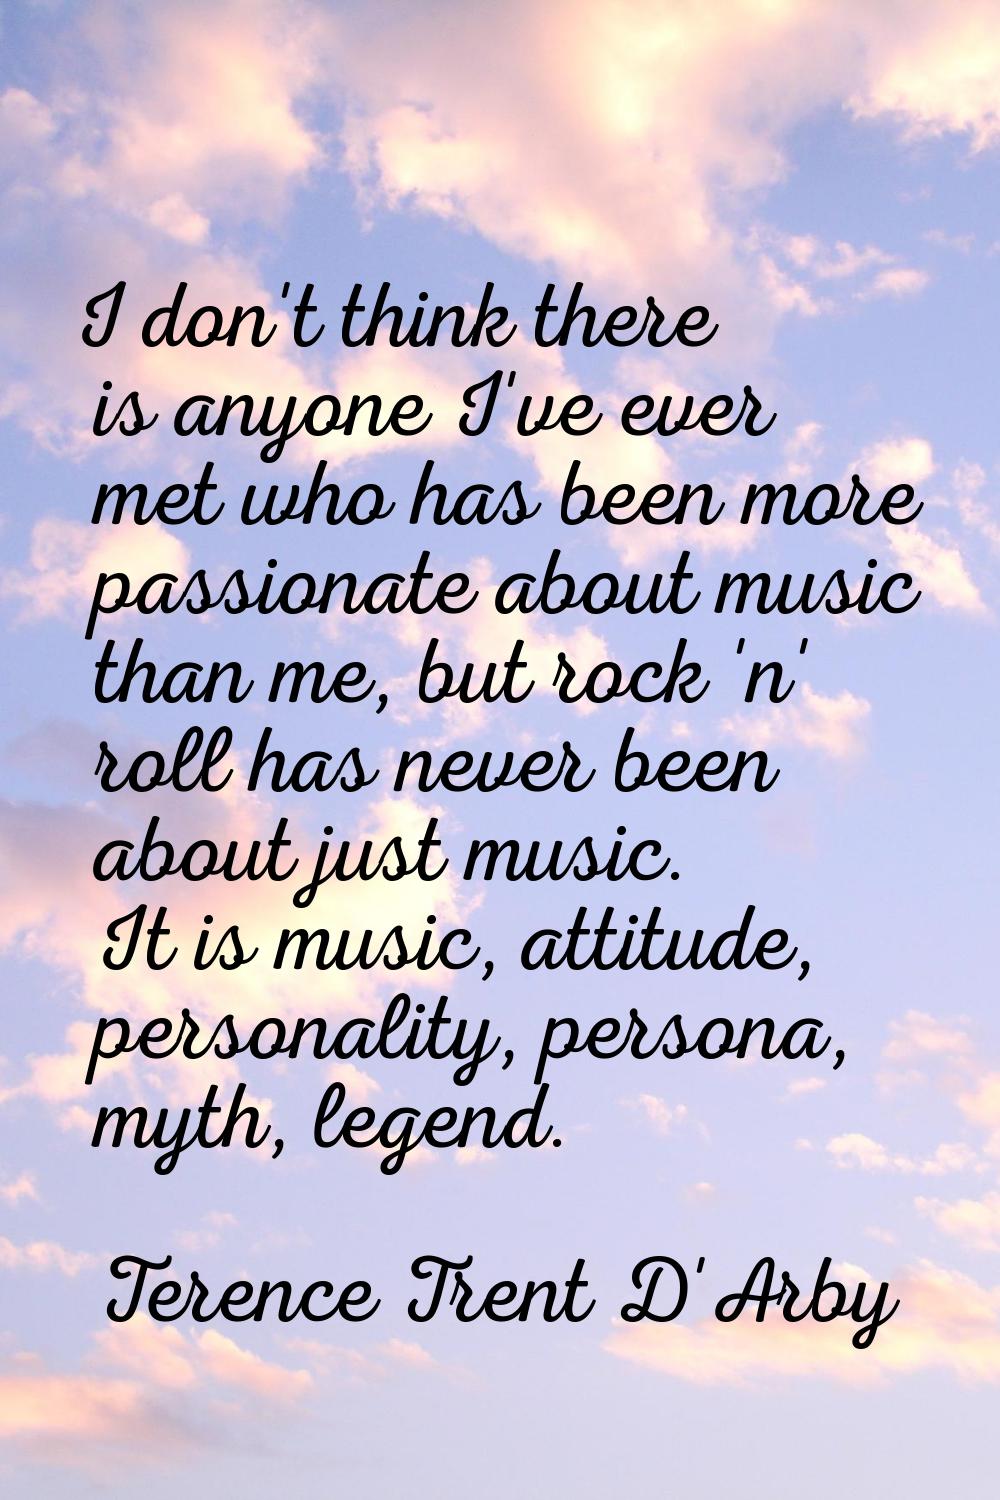 I don't think there is anyone I've ever met who has been more passionate about music than me, but r